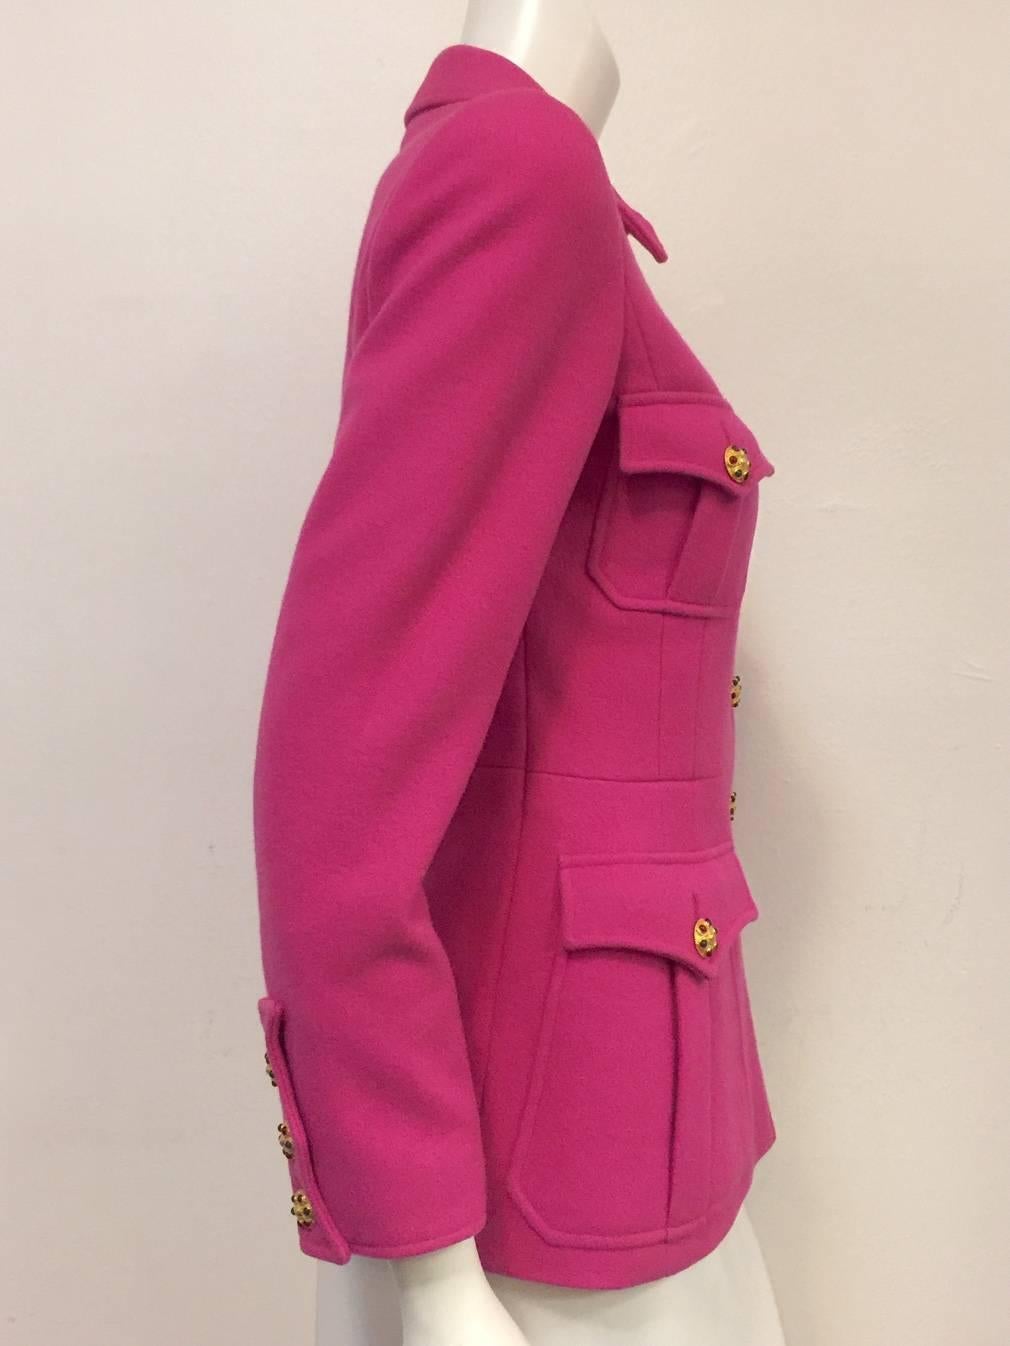 Chanel Boutique 1996 Fall Fuchsia Wool Jacket is a case study in Karl's innate ability to retool Coco's iconic jacket time and again!  Features ultra-luxurious Melton wool, and sophisticated design and styling that evokes the military.  Fitted